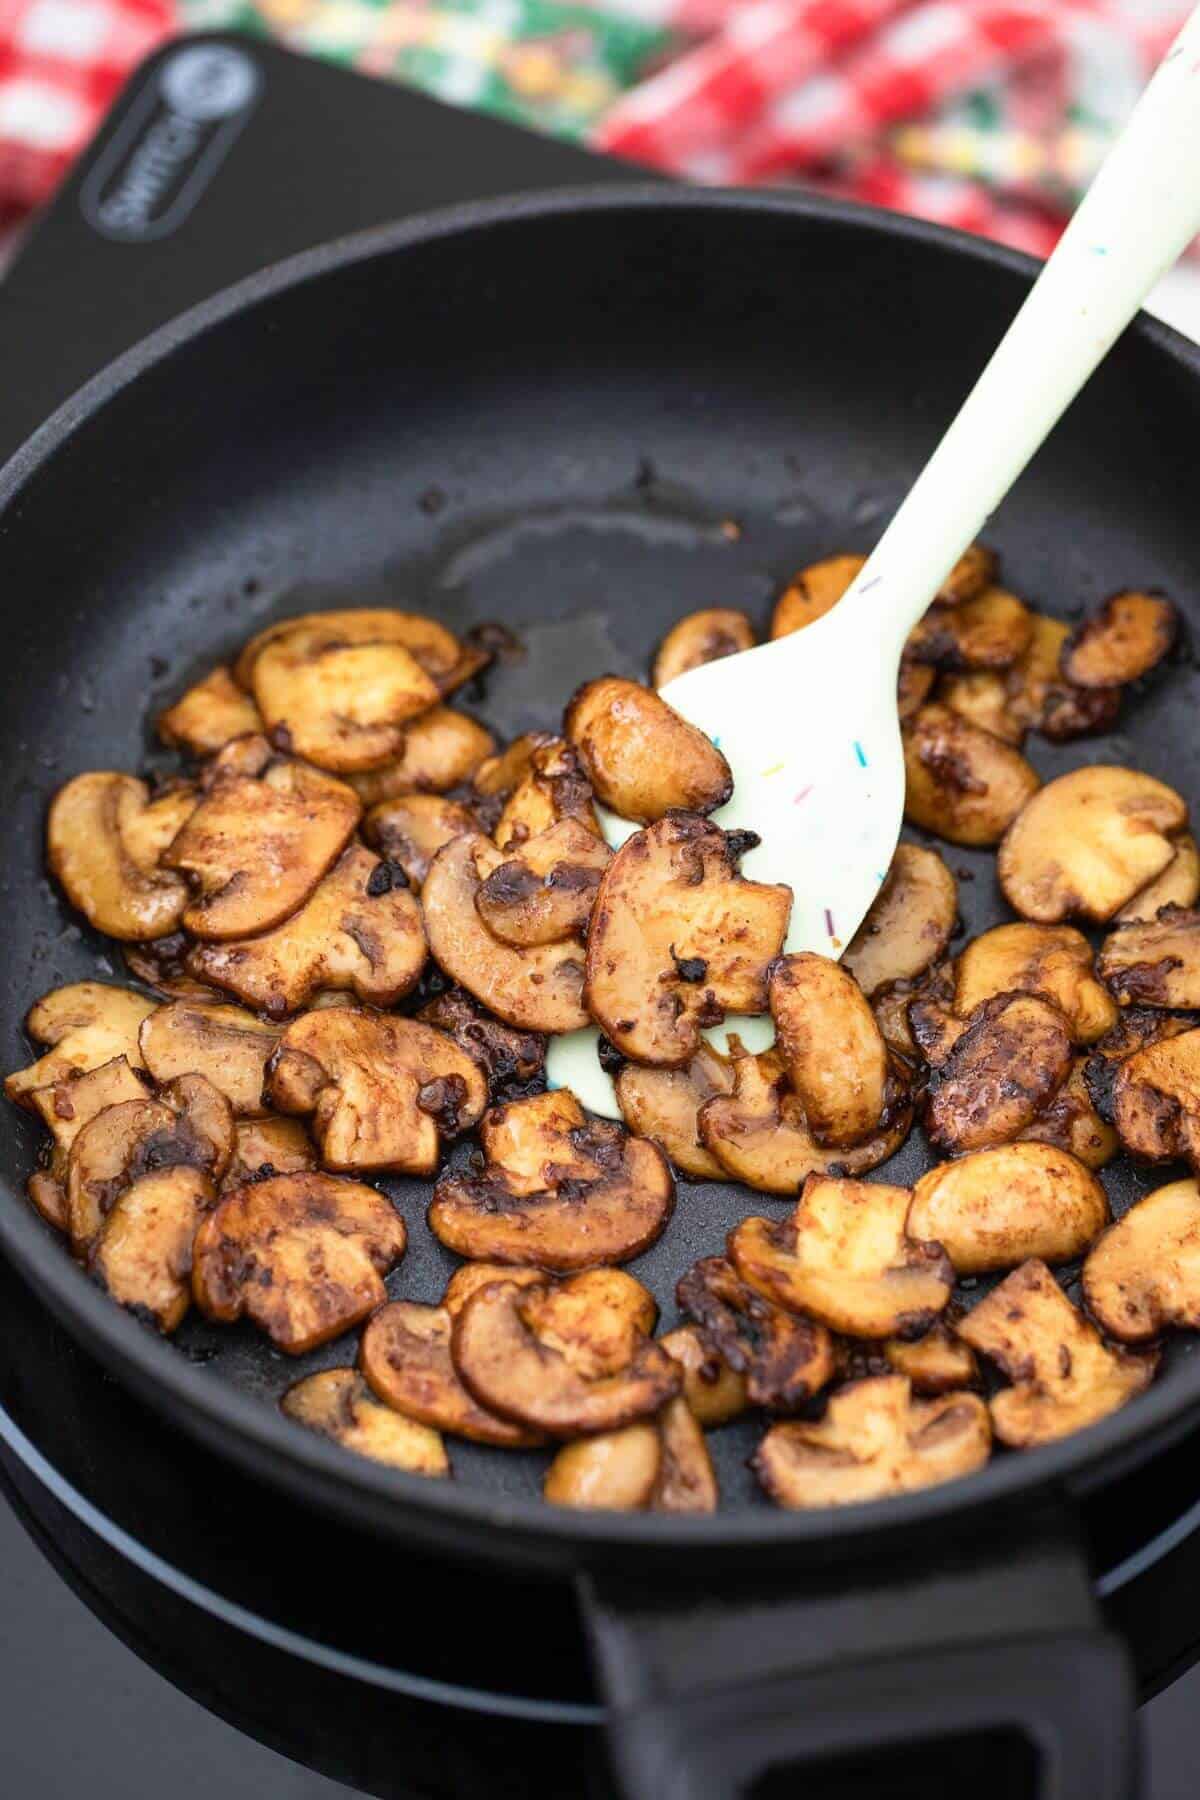 Fried mushrooms in a frying pan with a spoon.